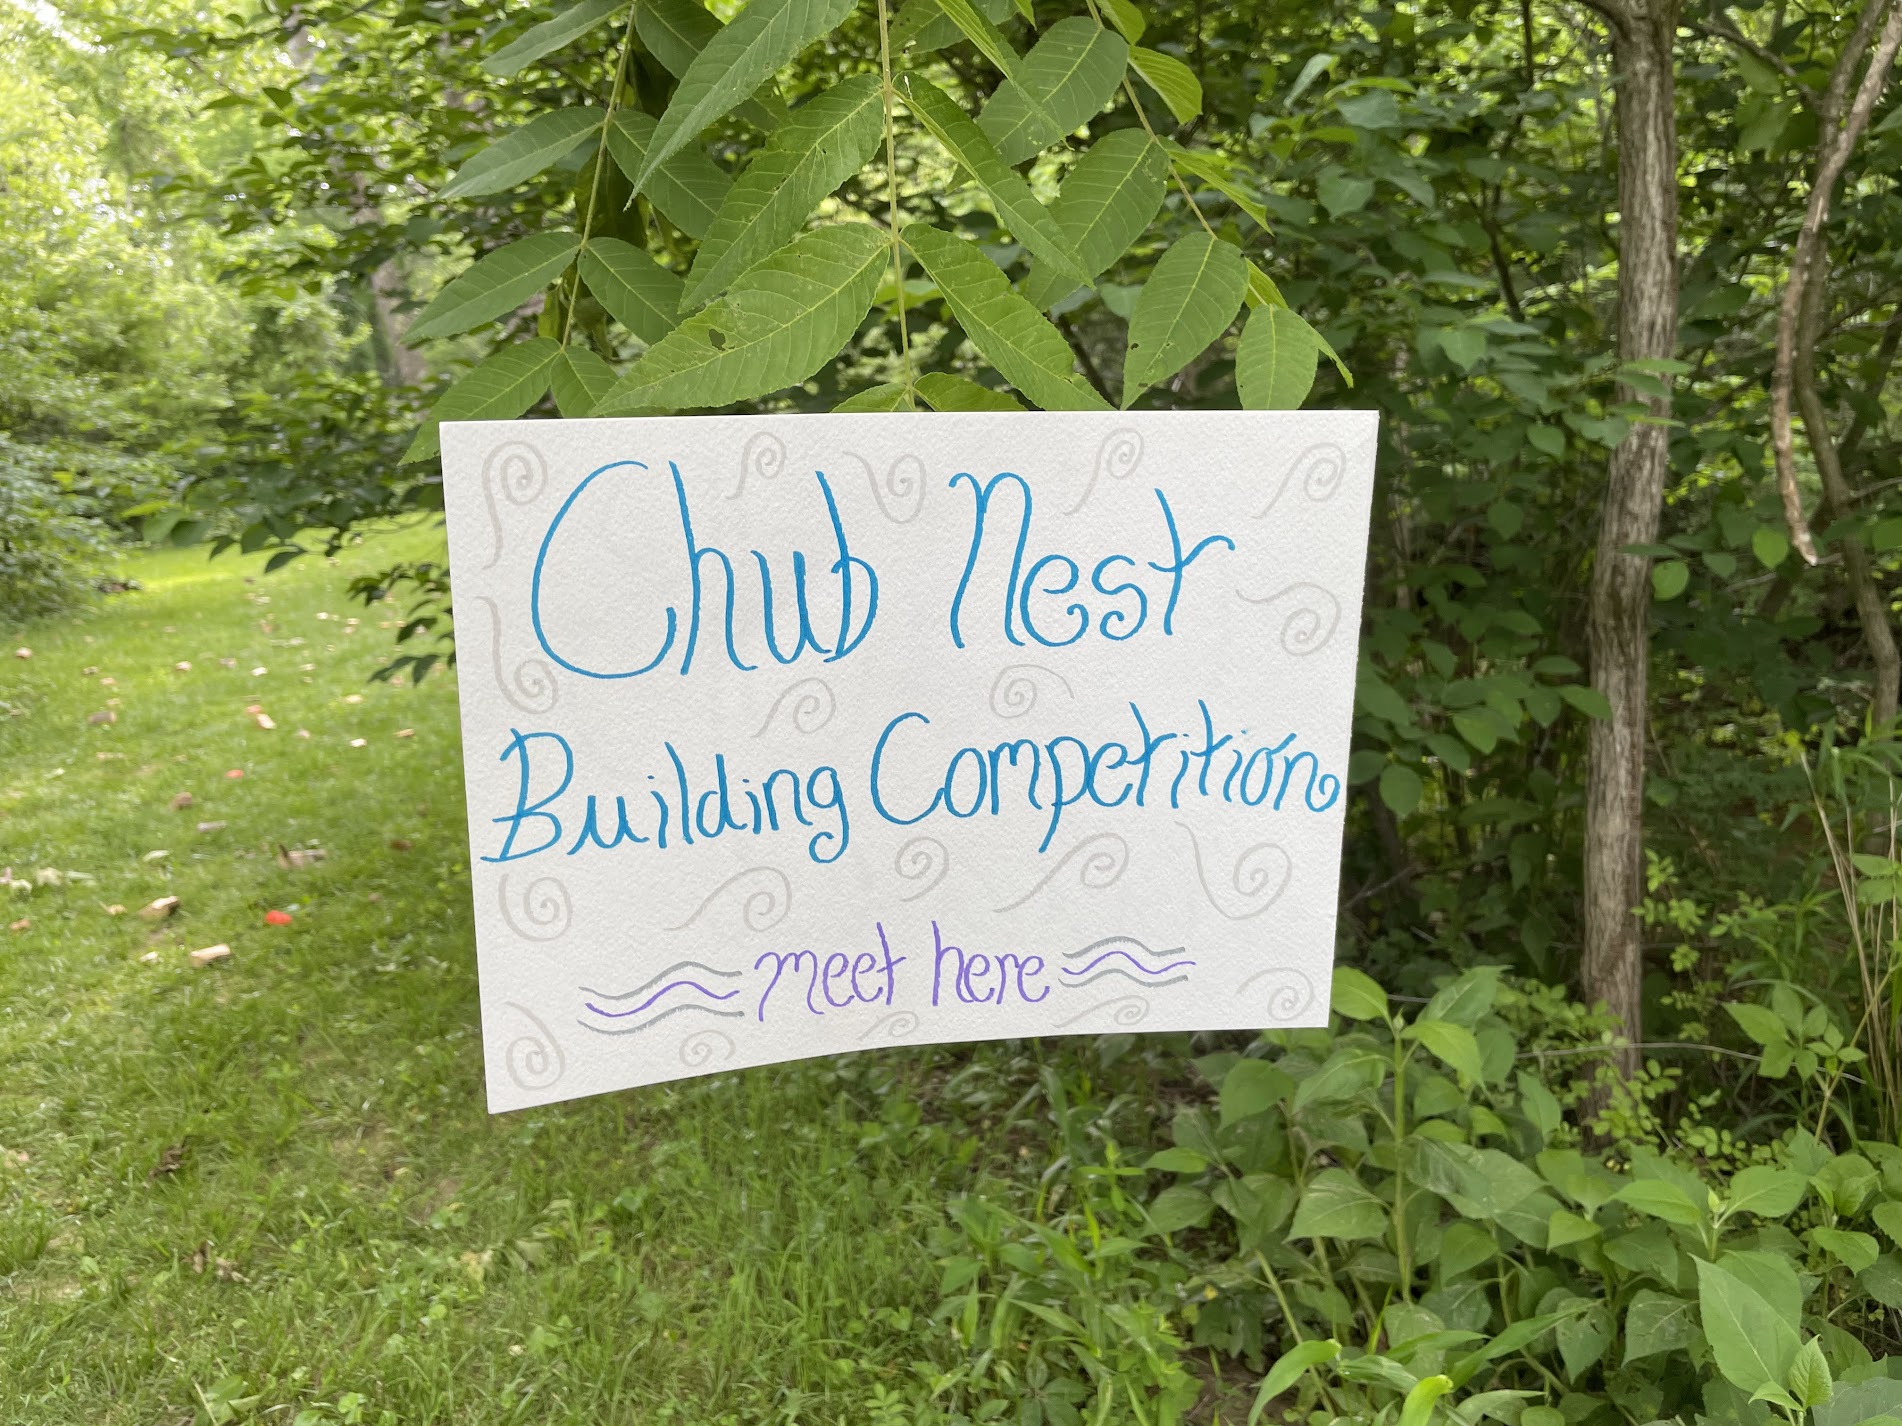 A handwritten sign reads “Chub Nest Building Competition Meet Here” in blue and purple writing. Surrounding the sign are trees, leaves, and green grass. 